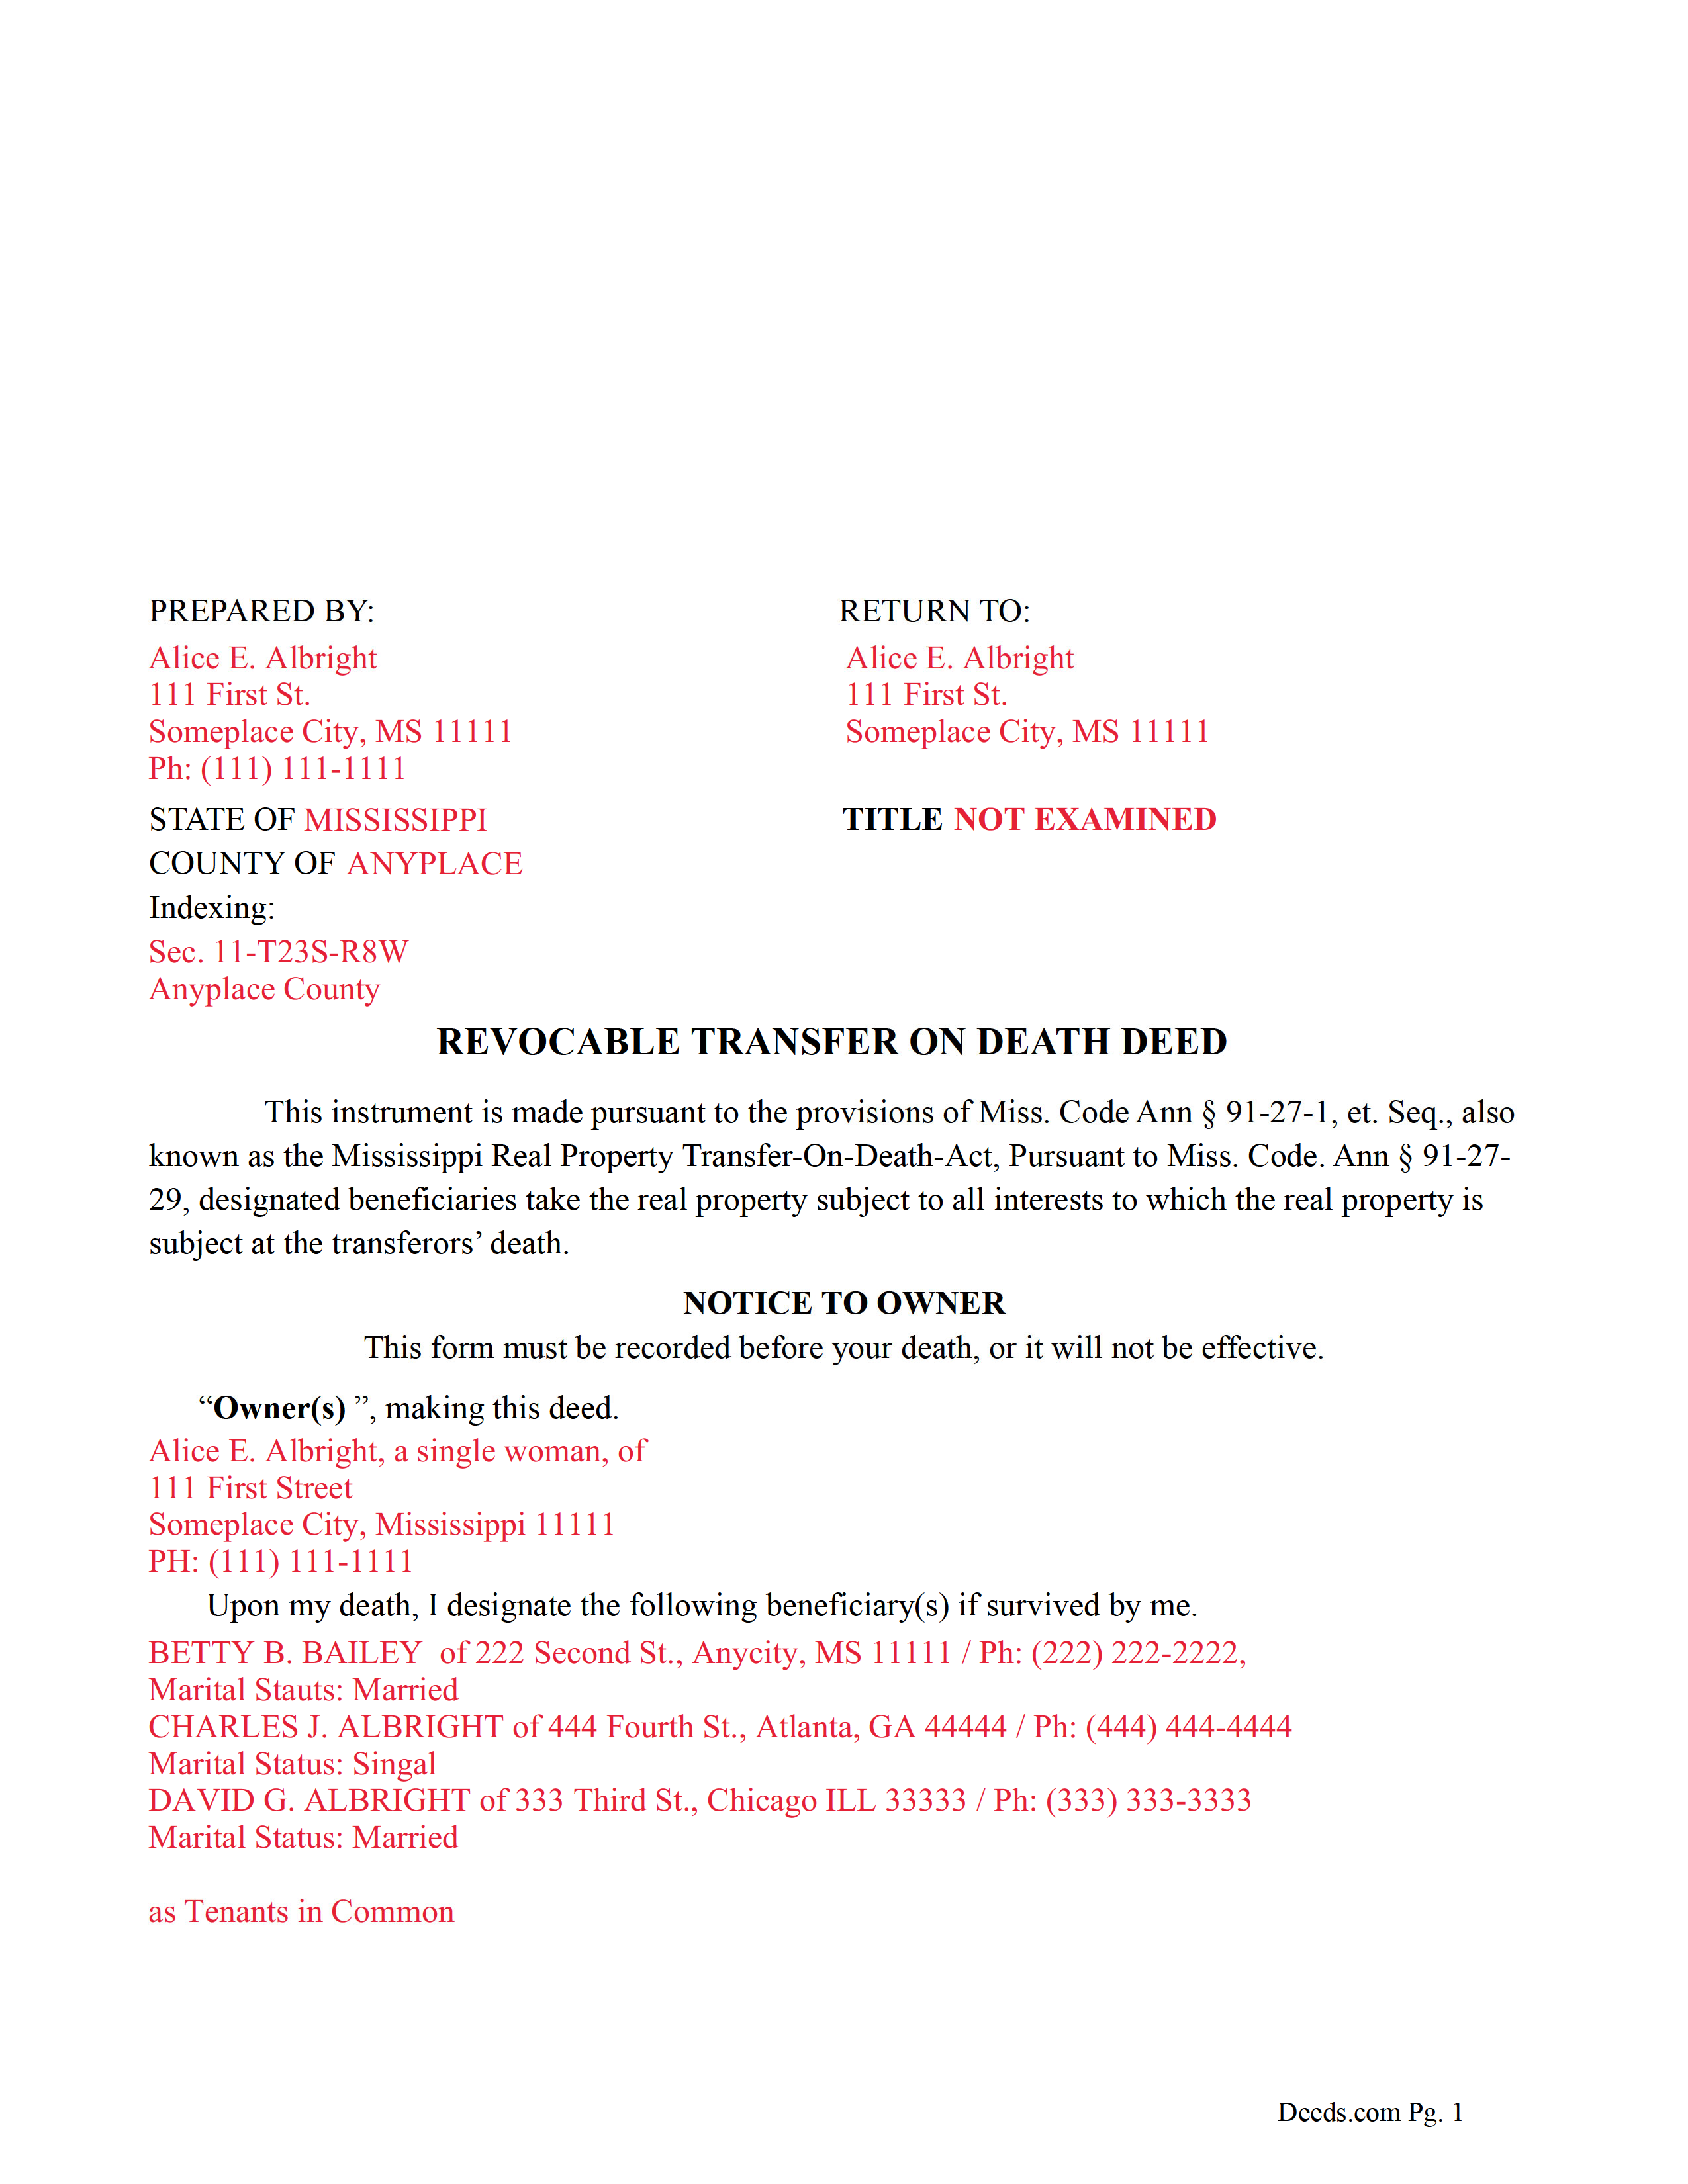 Completed Example of the Revocable Transfer on Death Deed Document